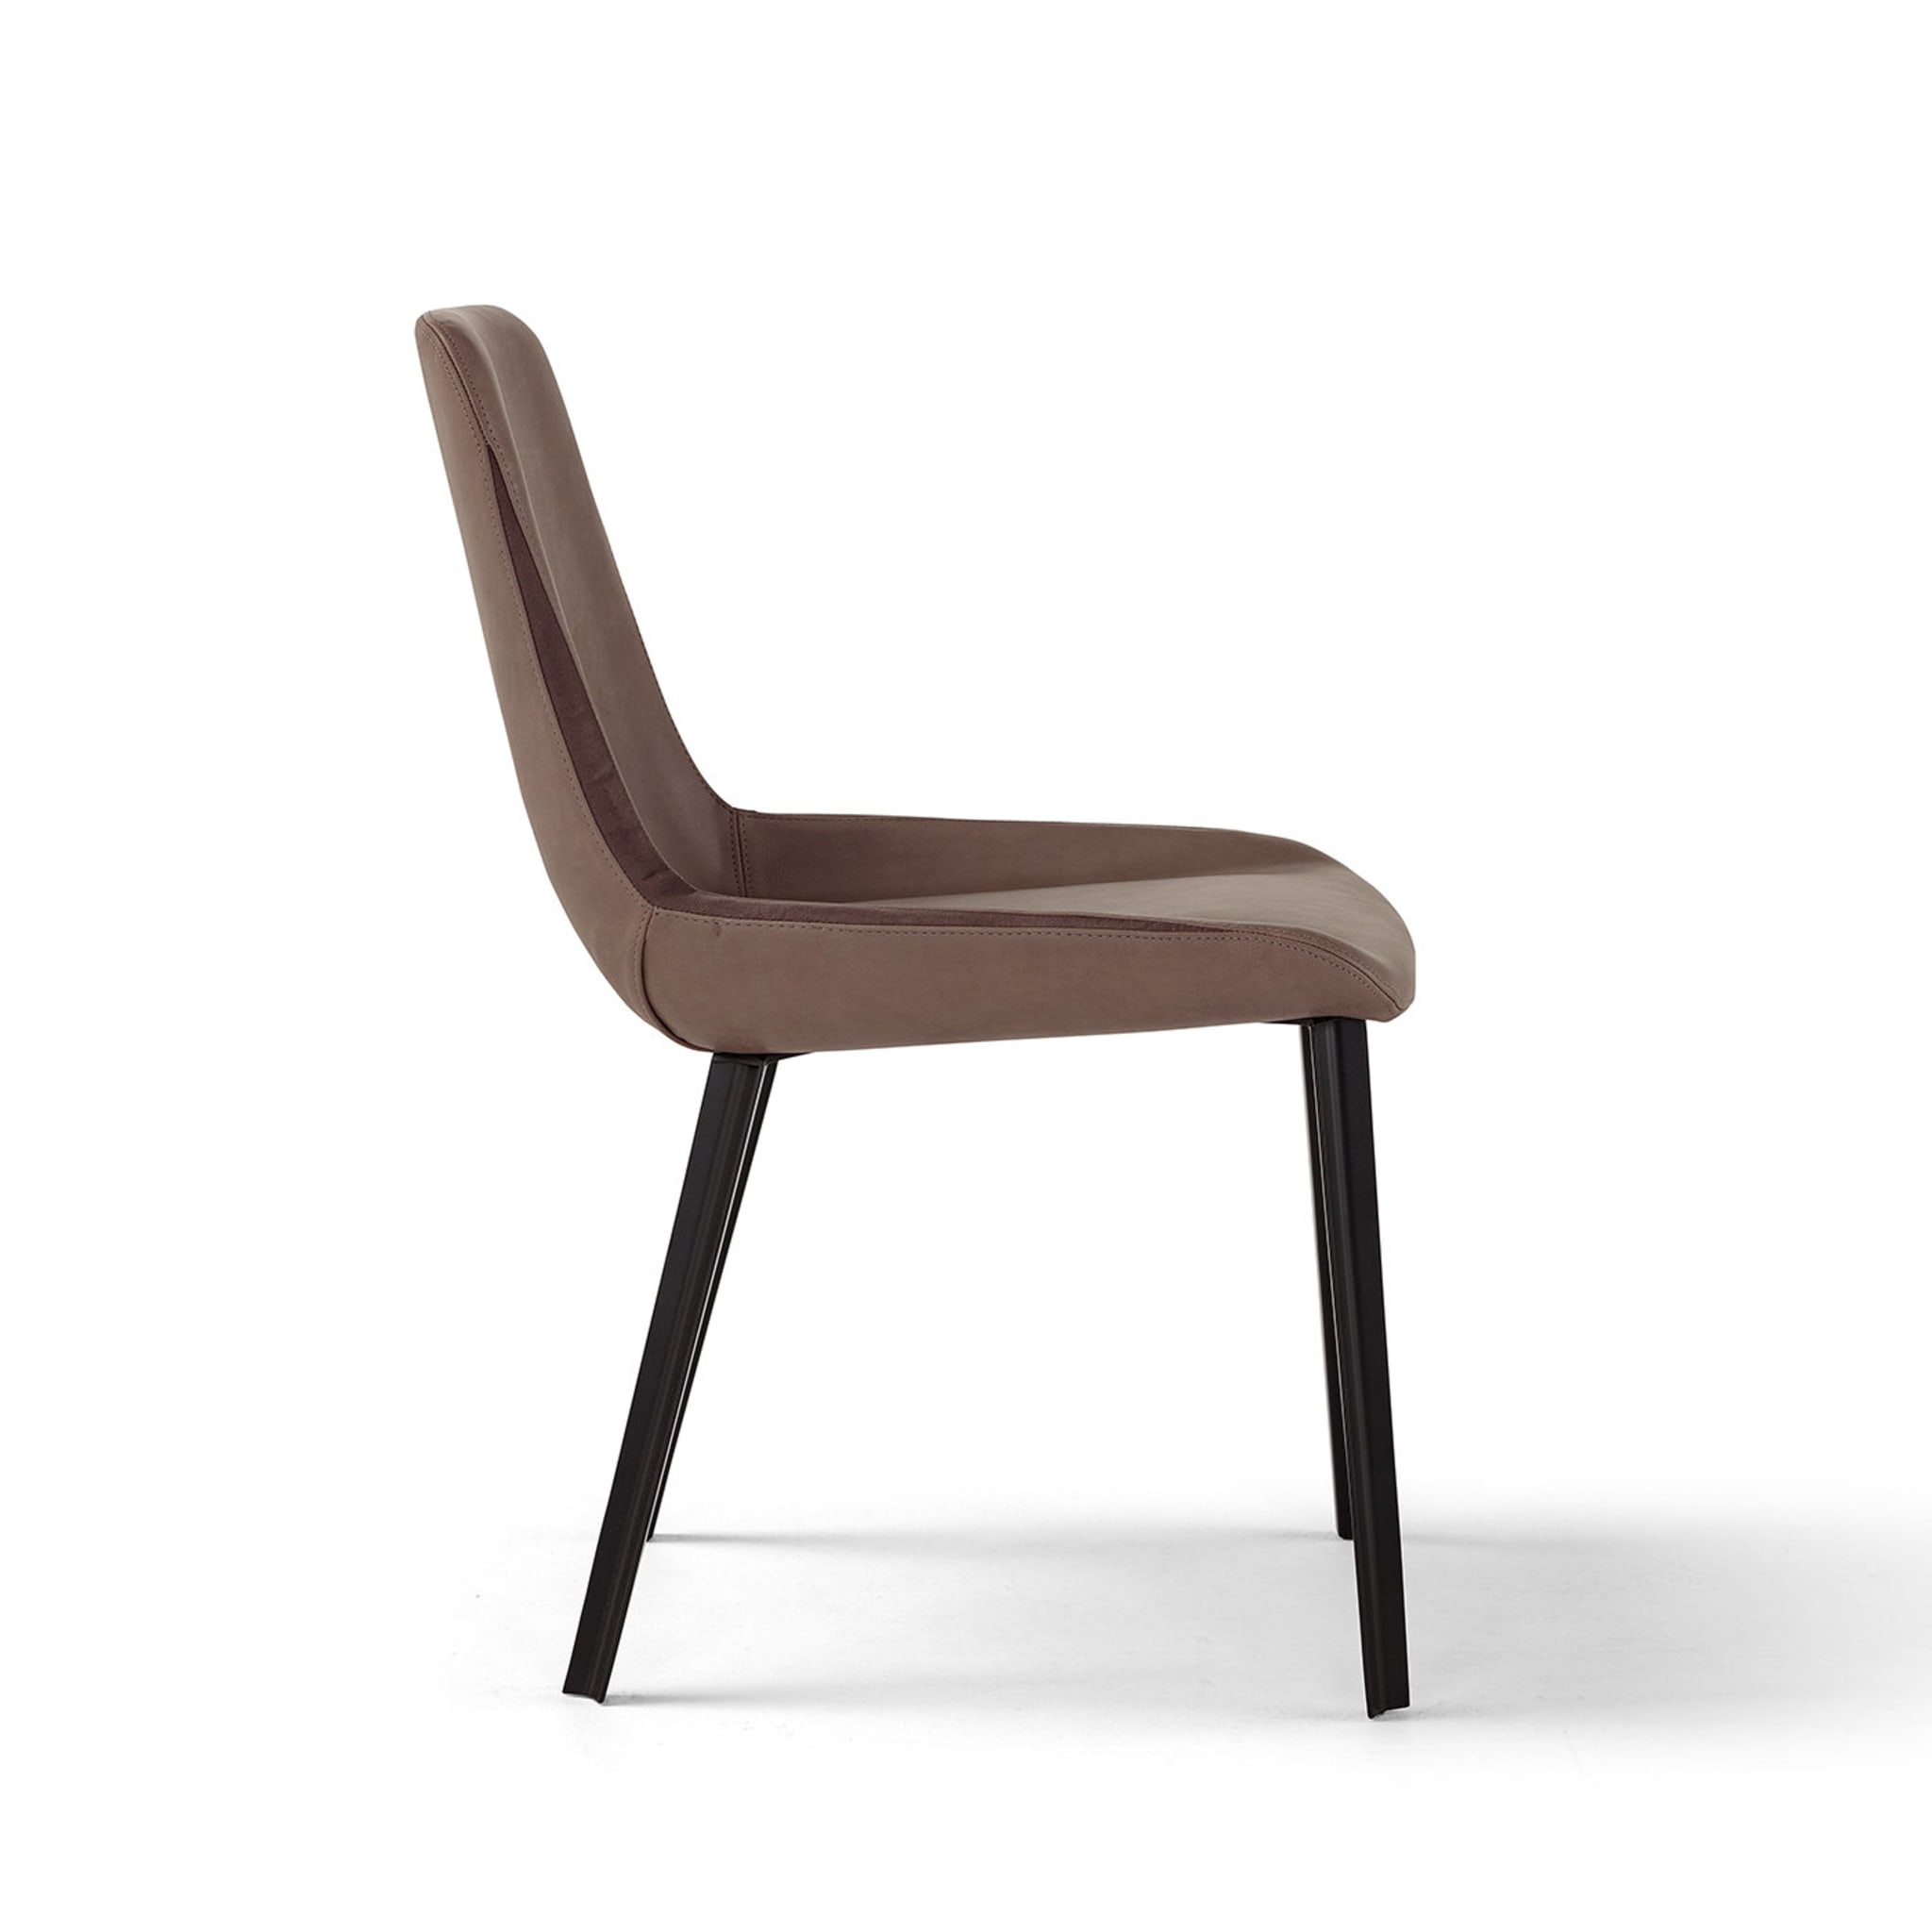 Panis Leather Chair by Anton Cristell and Emanuel Gargano - Alternative view 4